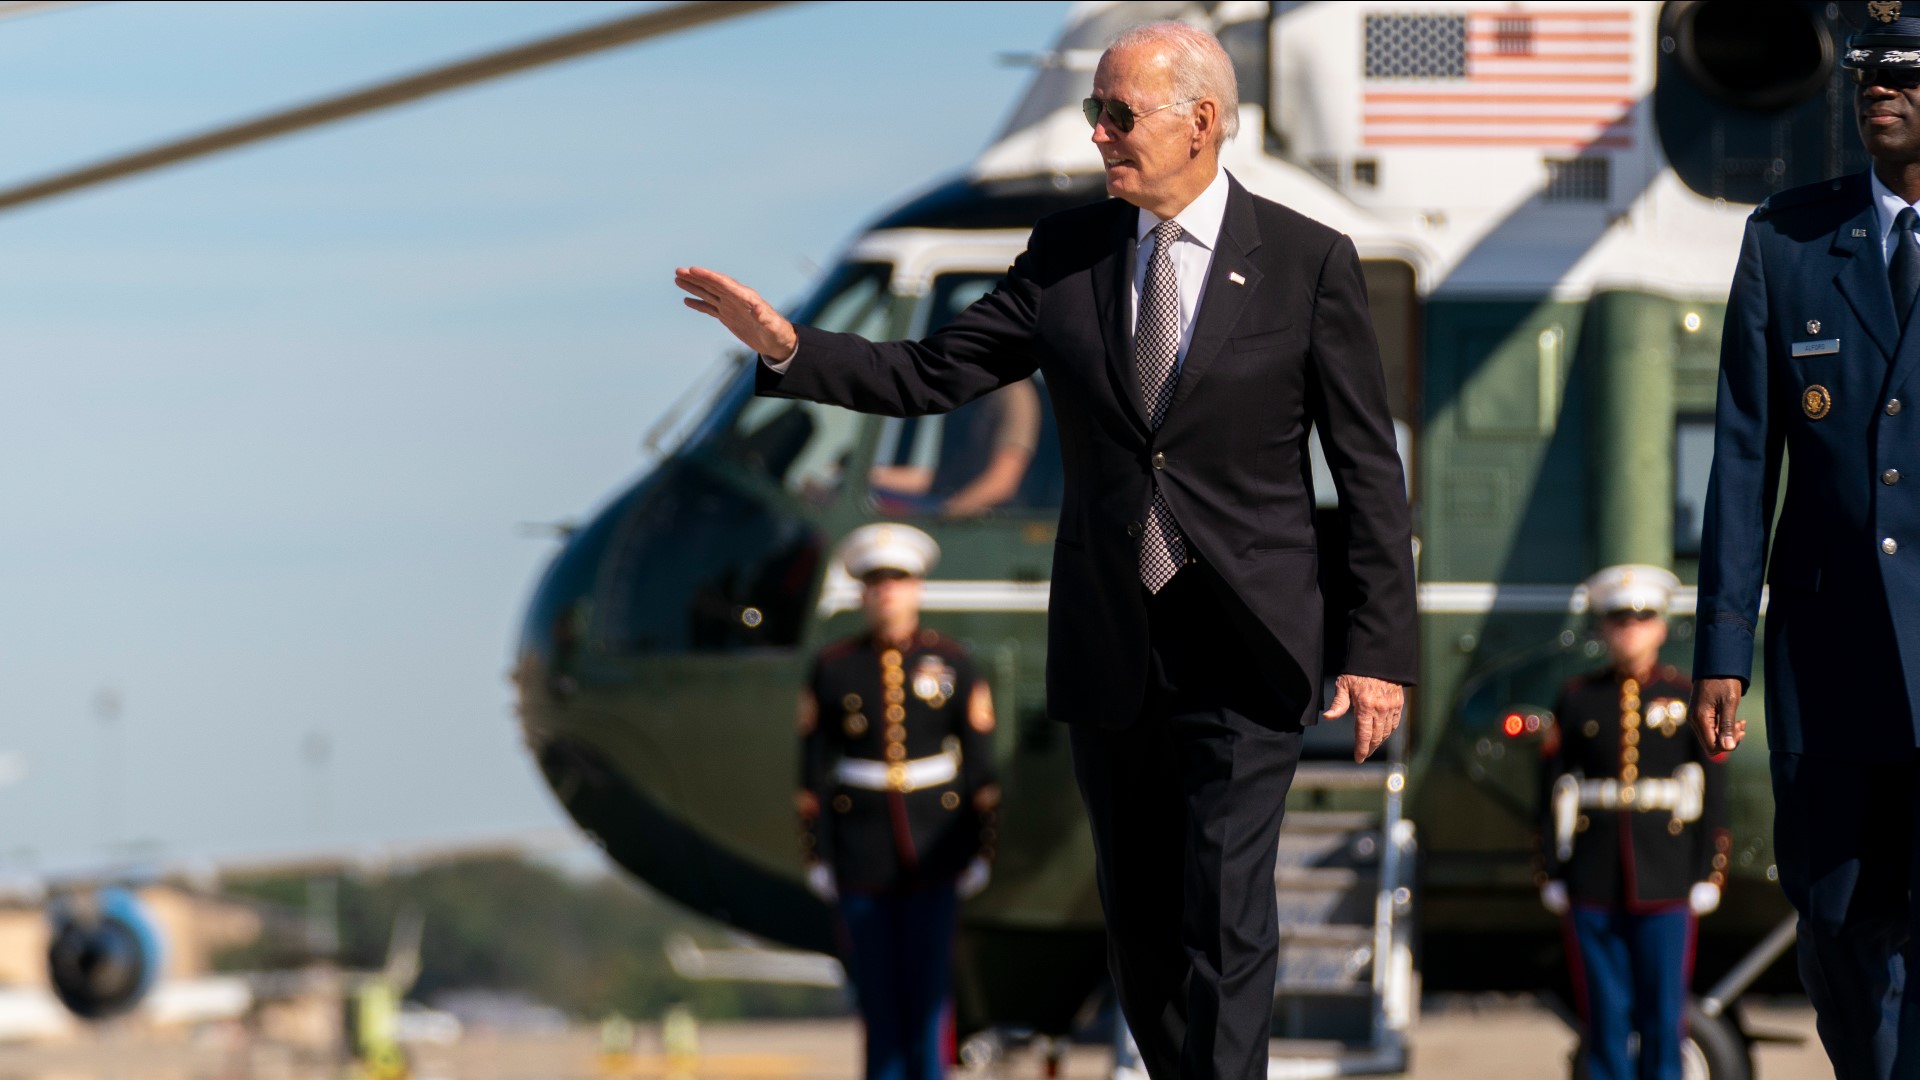 Biden will be visiting the TSMC plant as the company continues to scale up U.S. computer chip production.